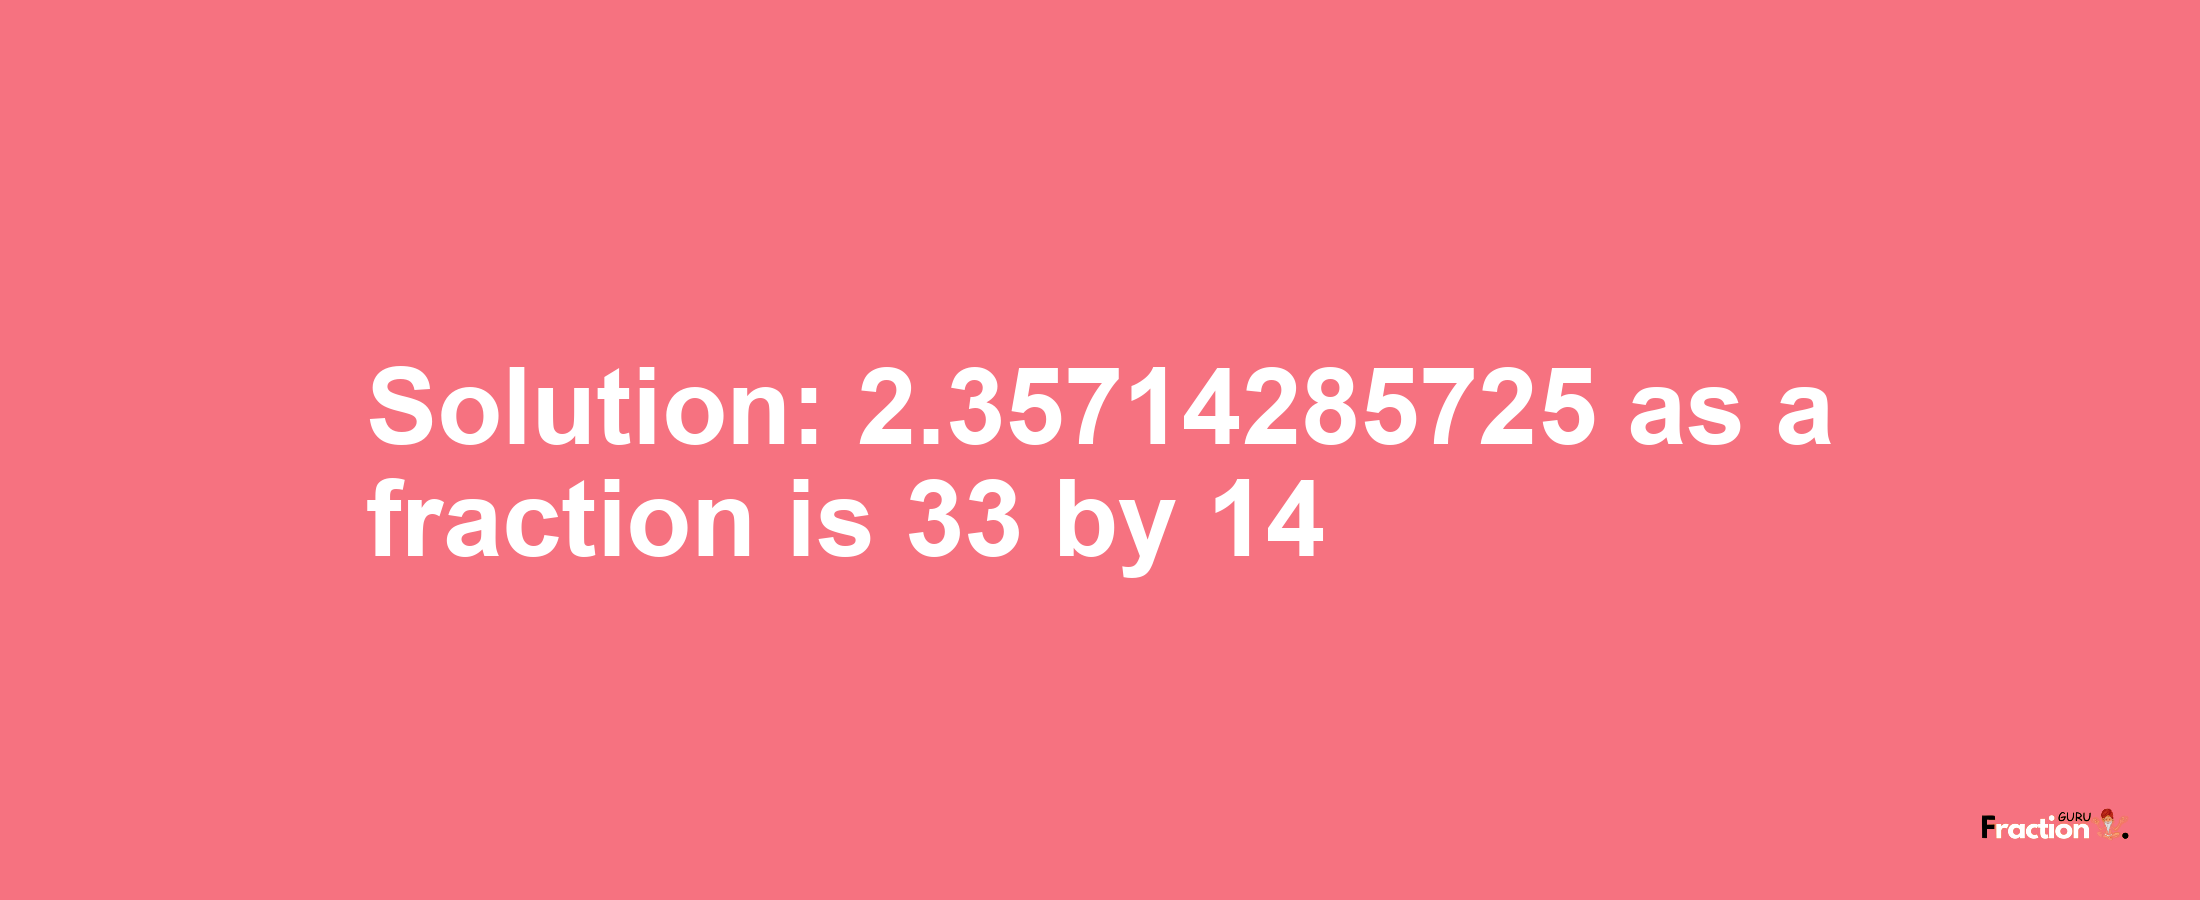 Solution:2.35714285725 as a fraction is 33/14